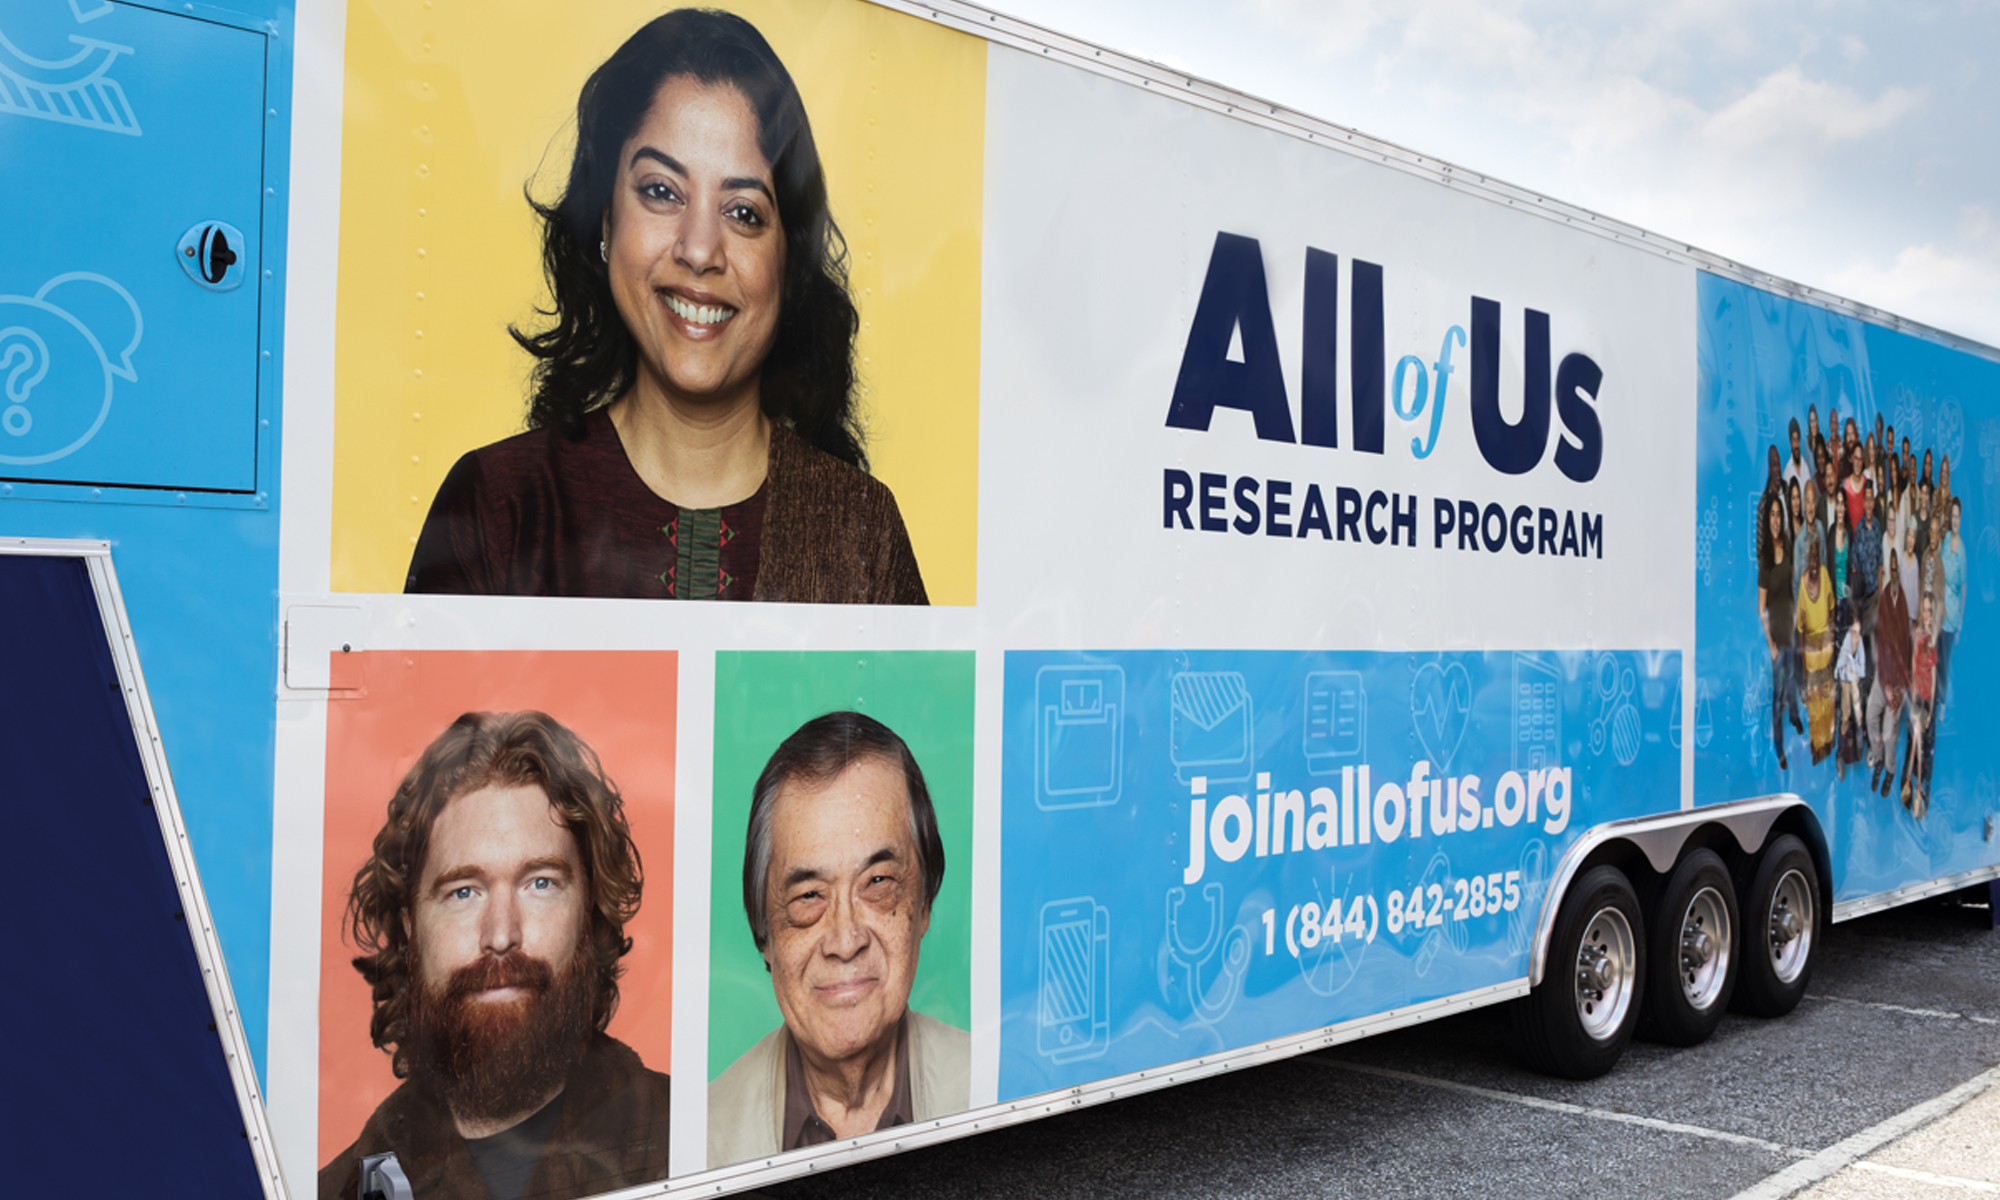 ‘All of Us’ Research Journey to Visit UMC